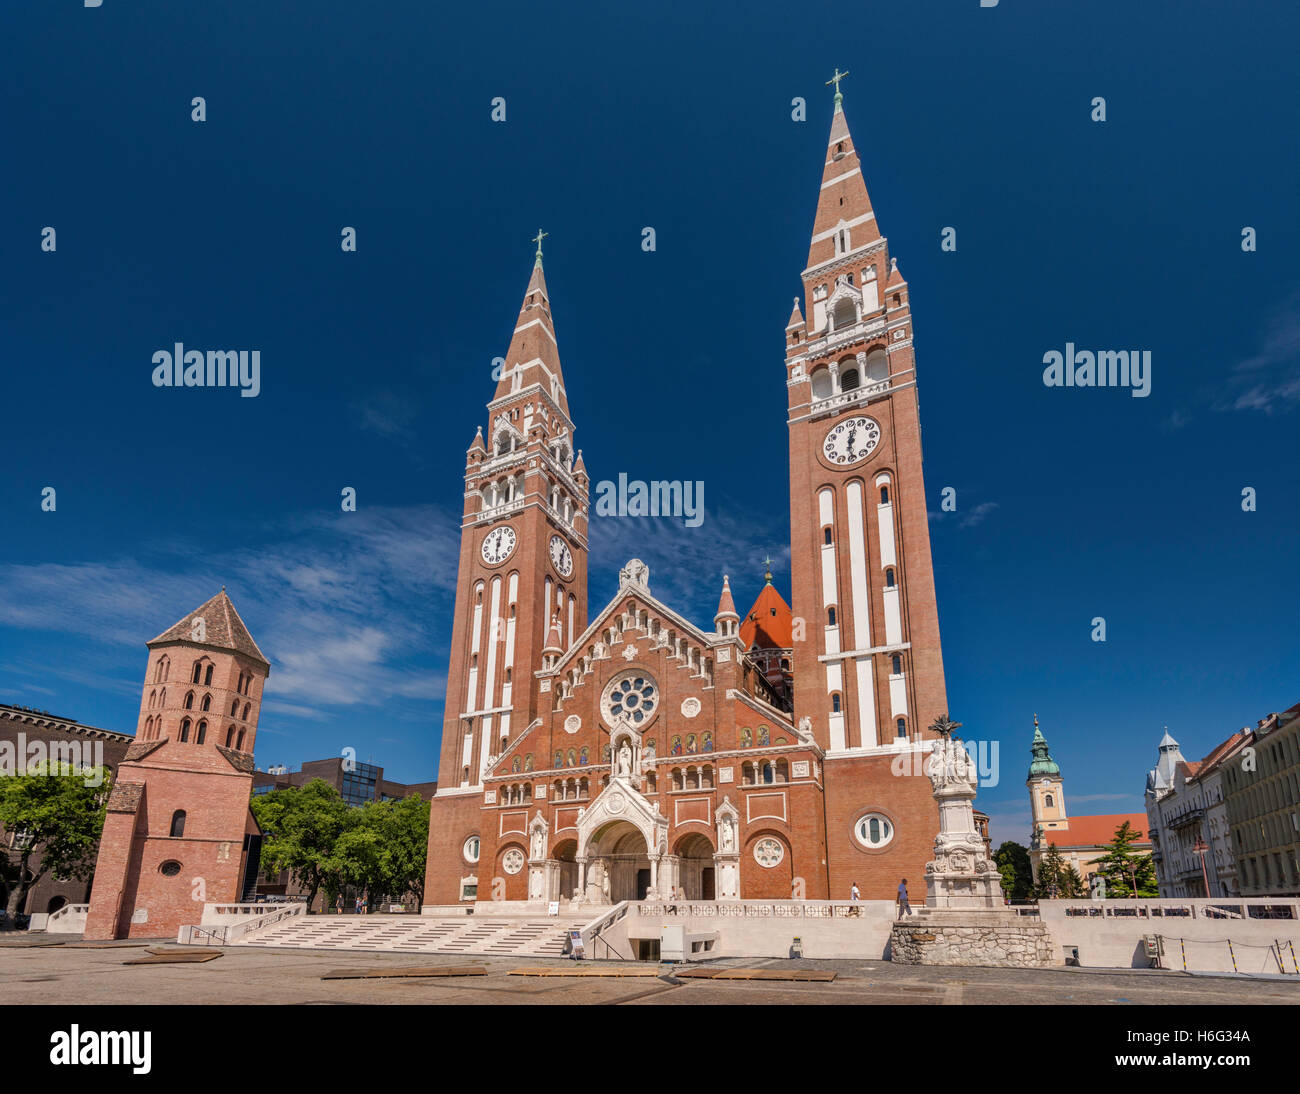 Cathedral, 1930, neo-Romanesque style, Saint Demetrius Tower, 12th century, Romanesque style, in Szeged, Hungary Stock Photo